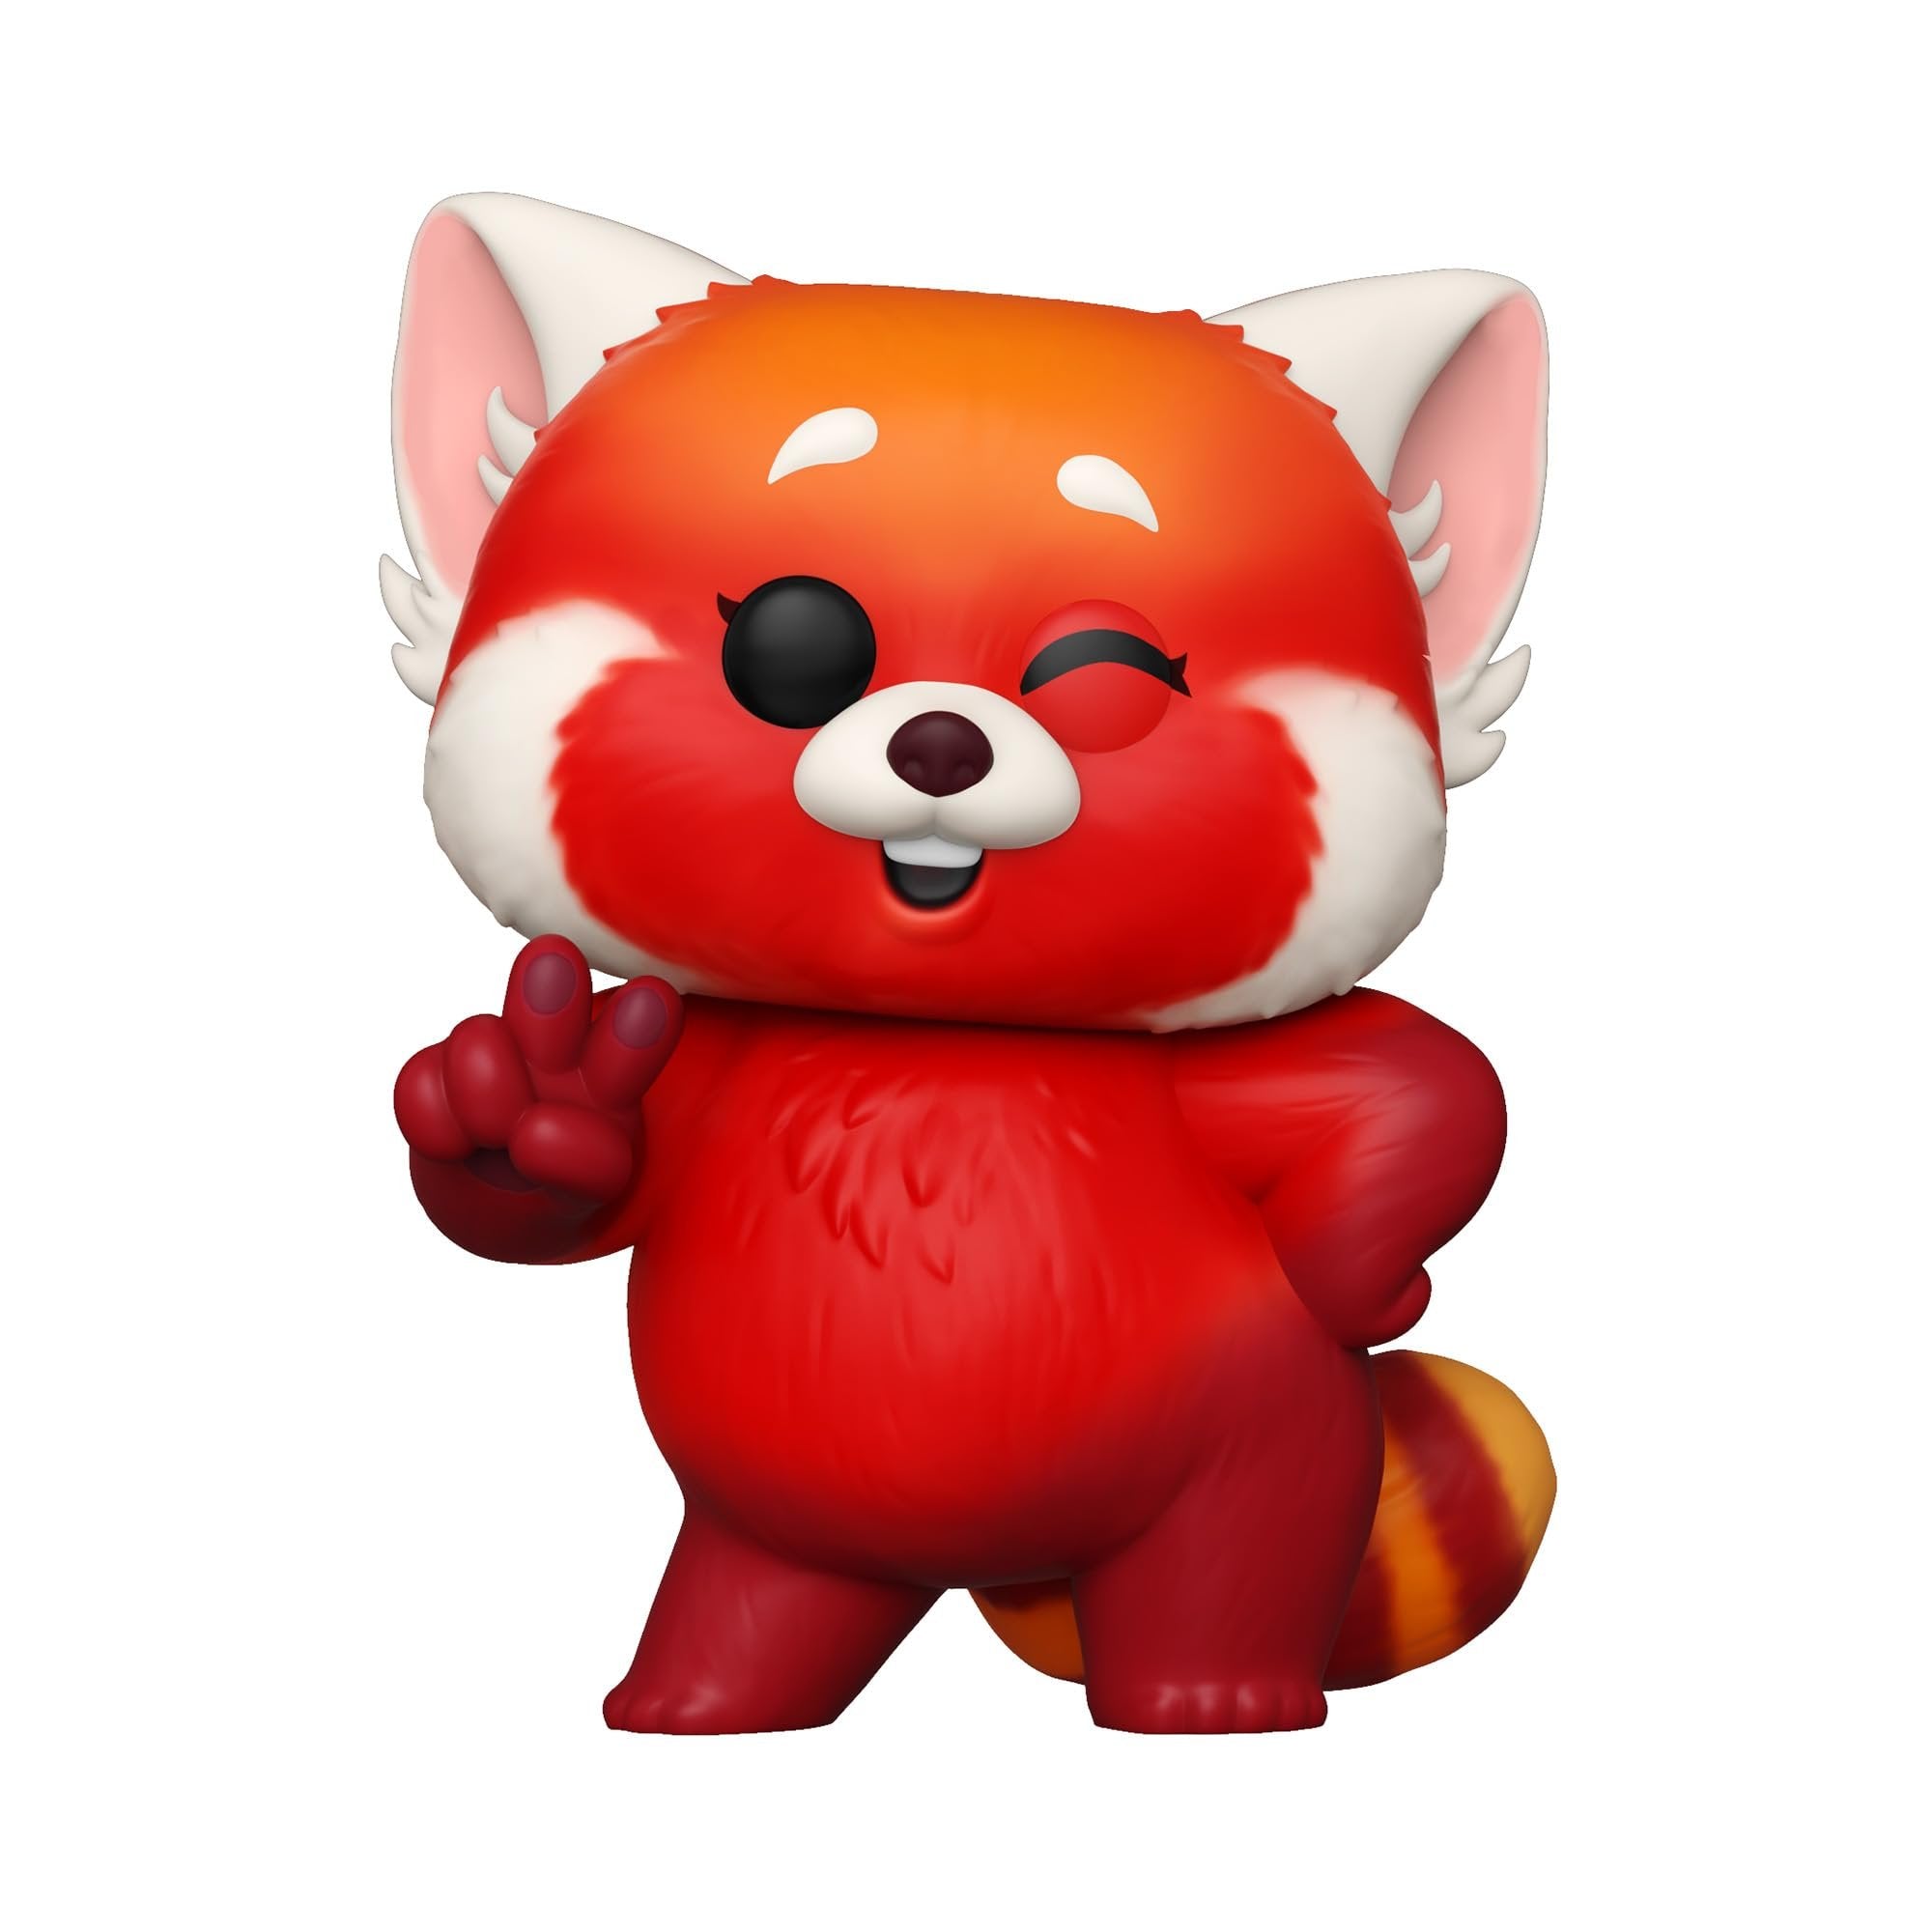 Funko POP! Super: Turning Red - Meilin Lee - Red Panda Mei - Collectible Vinyl Figure - Gift Idea - Official Merchandise - for Kids & Adults - Movies Fans - Model Figure for Collectors and Display